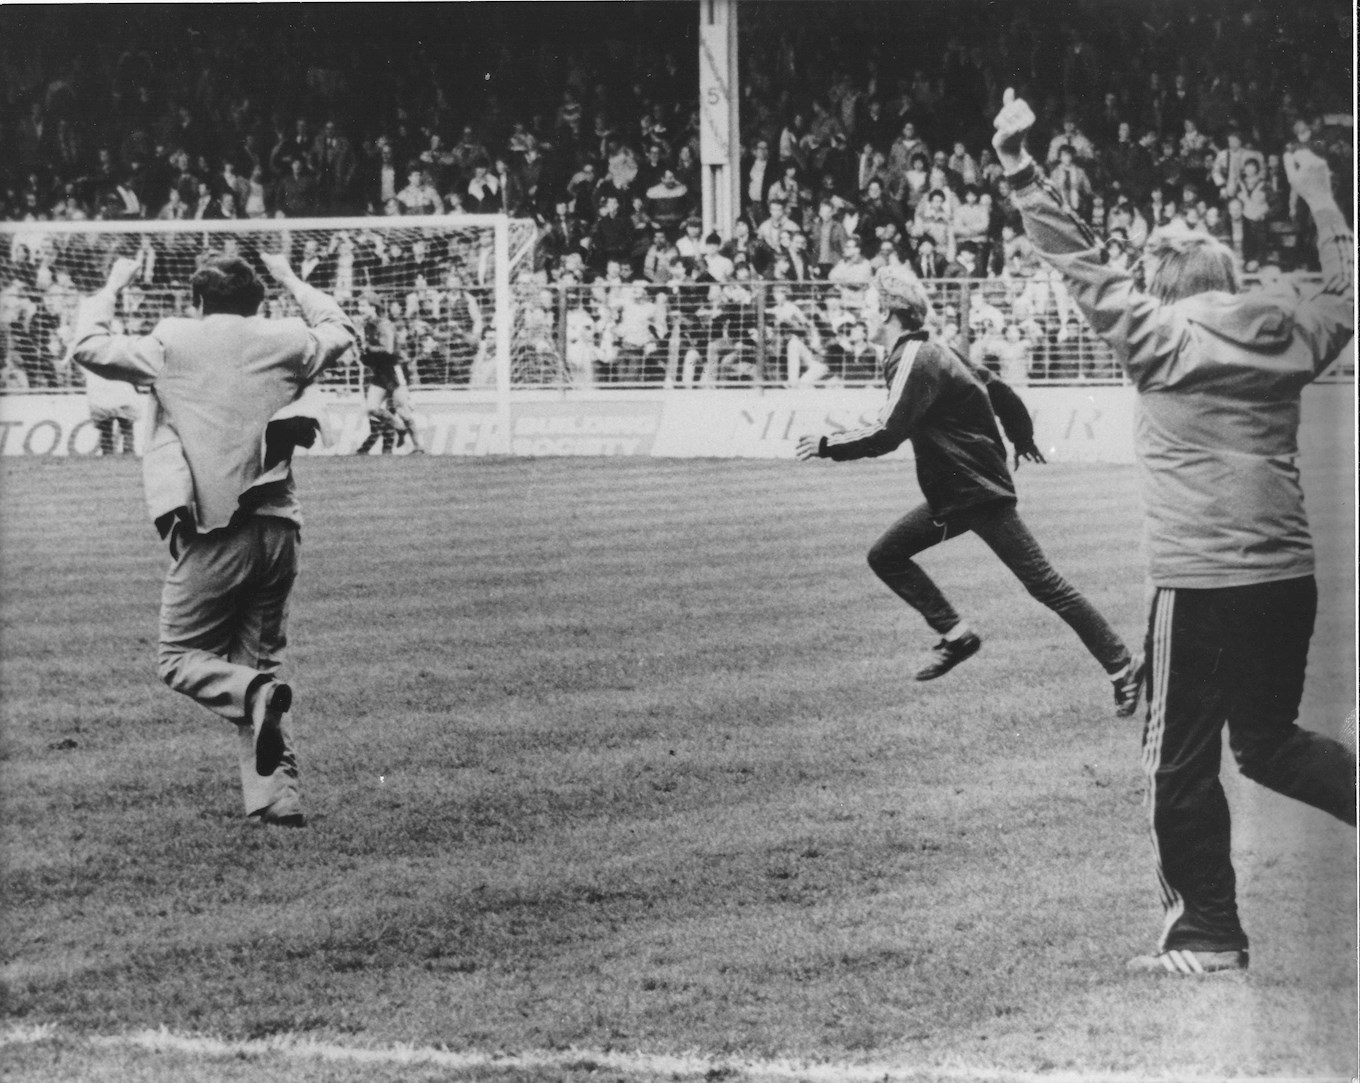 David Pleat famously runs onto the Maine Road pitch after Raddy Antic's late goal keeps the Hatters in the old First Division